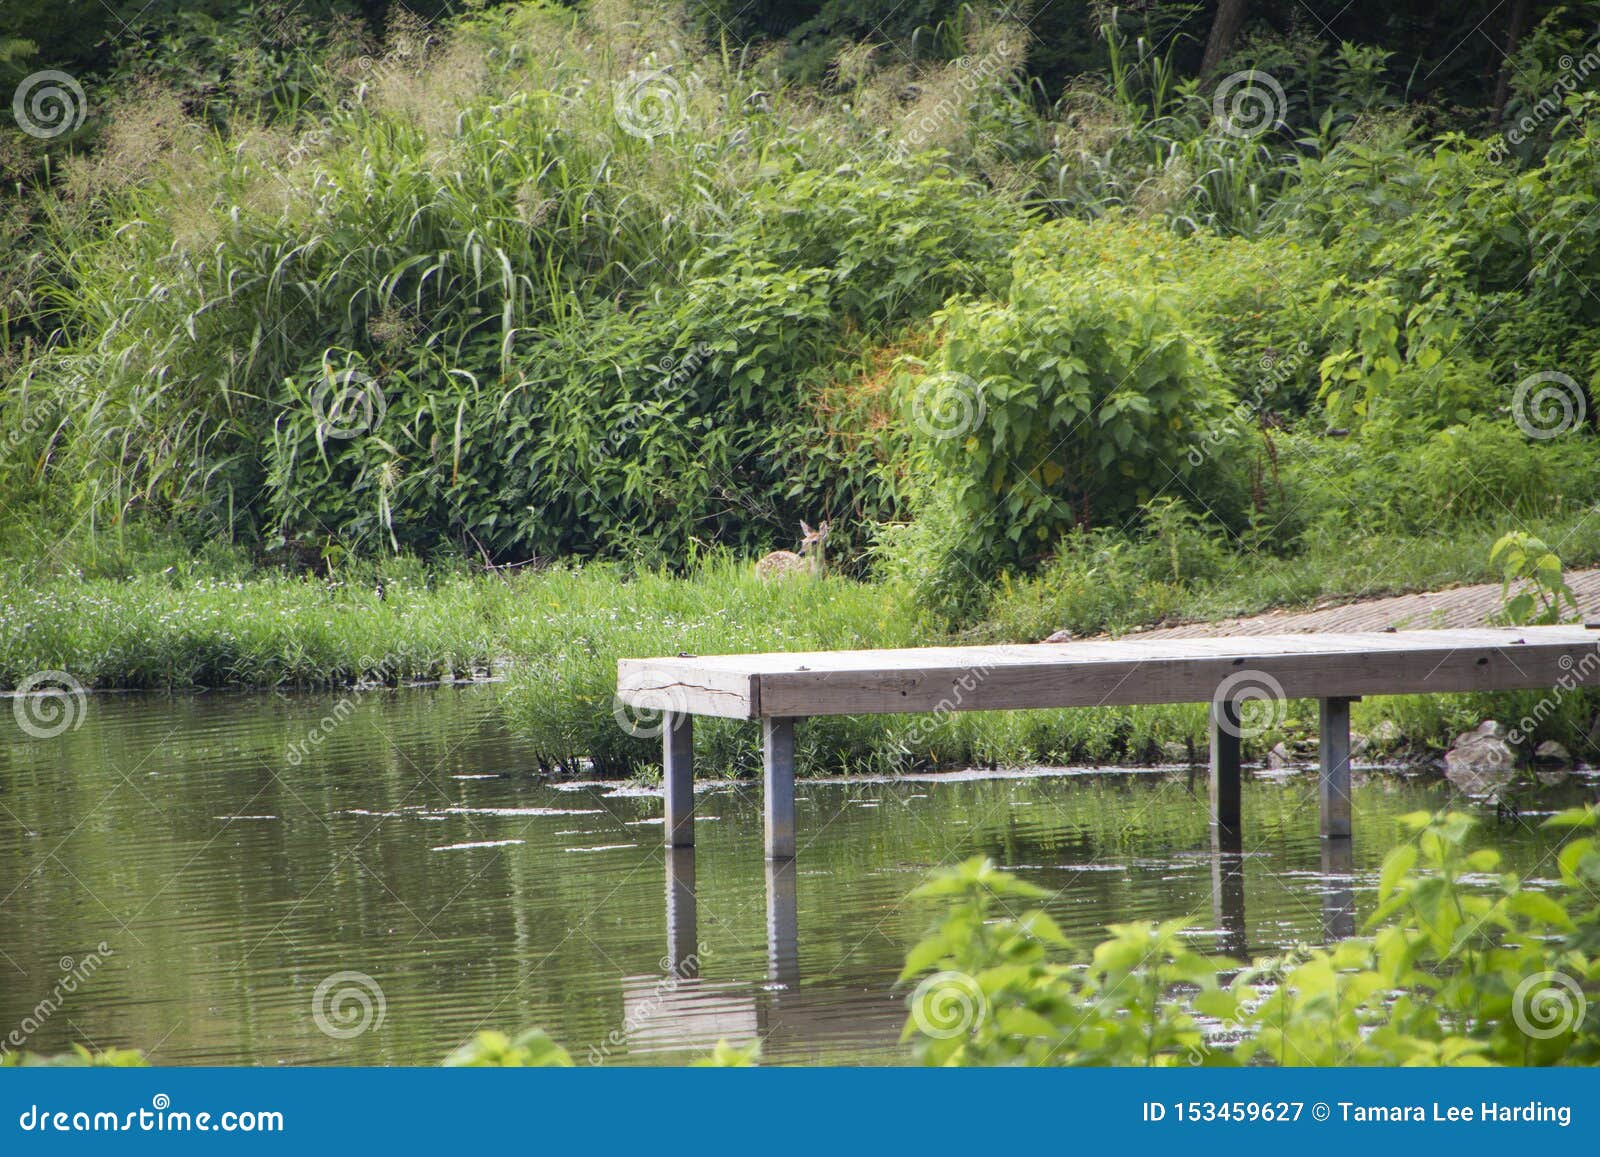 Dock On A Lake With Boat Ramp And Fawn Stock Image - Image 